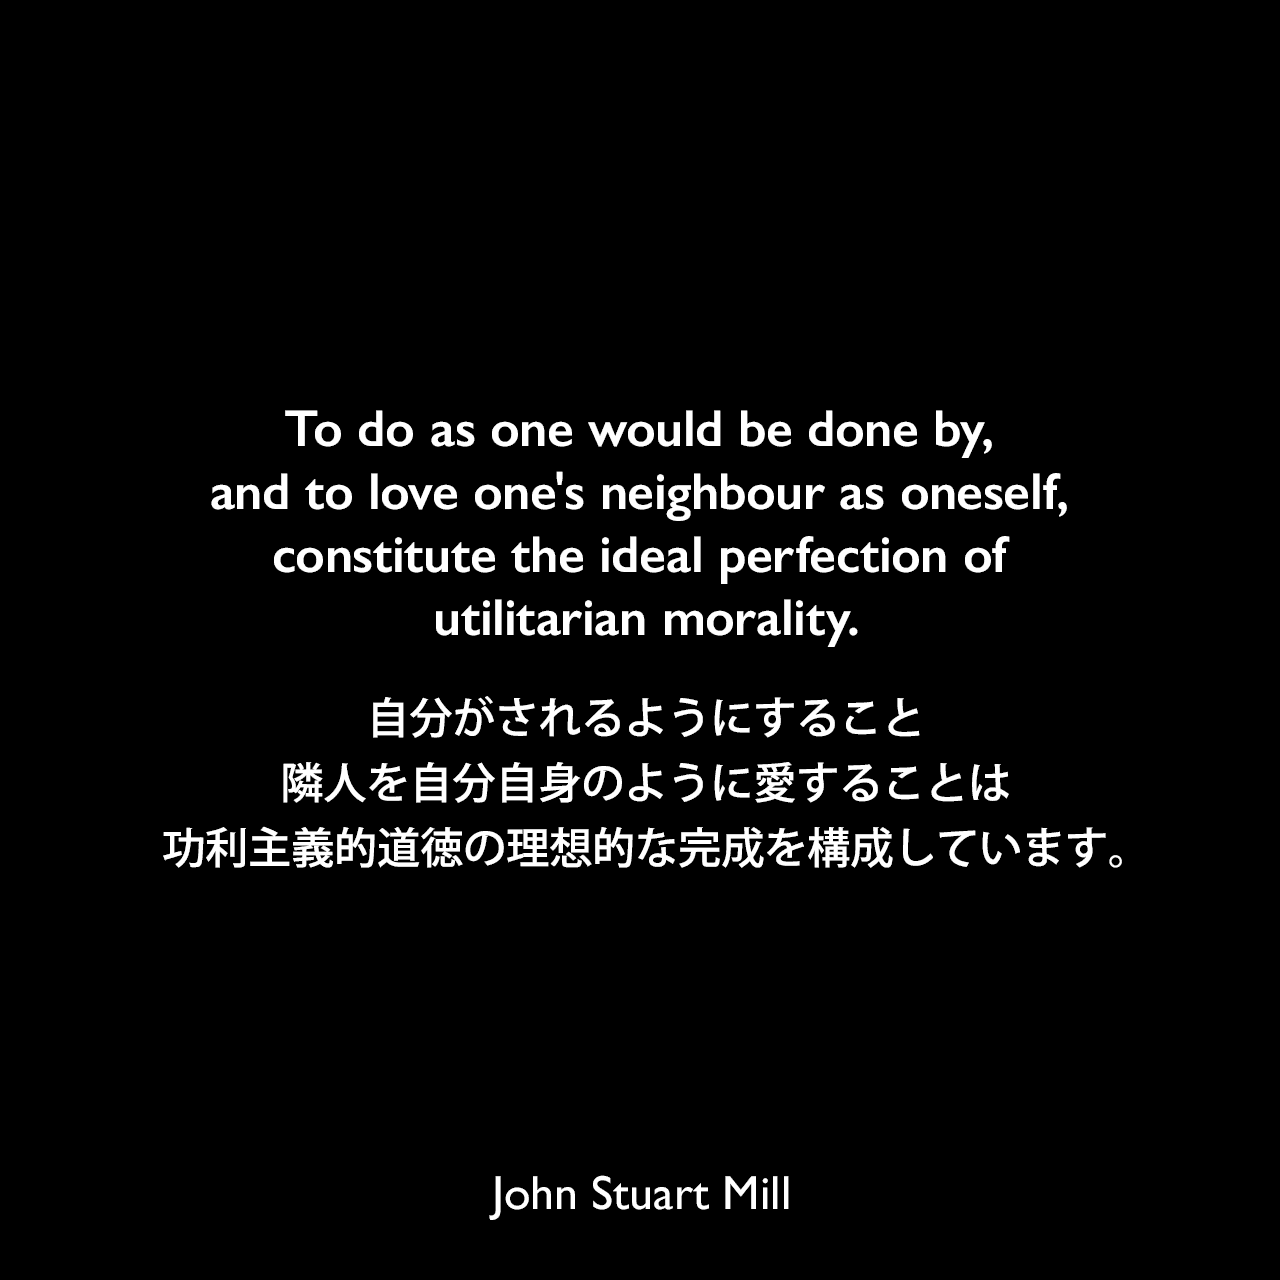 To do as one would be done by, and to love one's neighbour as oneself, constitute the ideal perfection of utilitarian morality.自分がされるようにすること、隣人を自分自身のように愛することは、功利主義的道徳の理想的な完成を構成しています。- ジョン・スチュアート・ミルによる本「功利主義論」よりJohn Stuart Mill